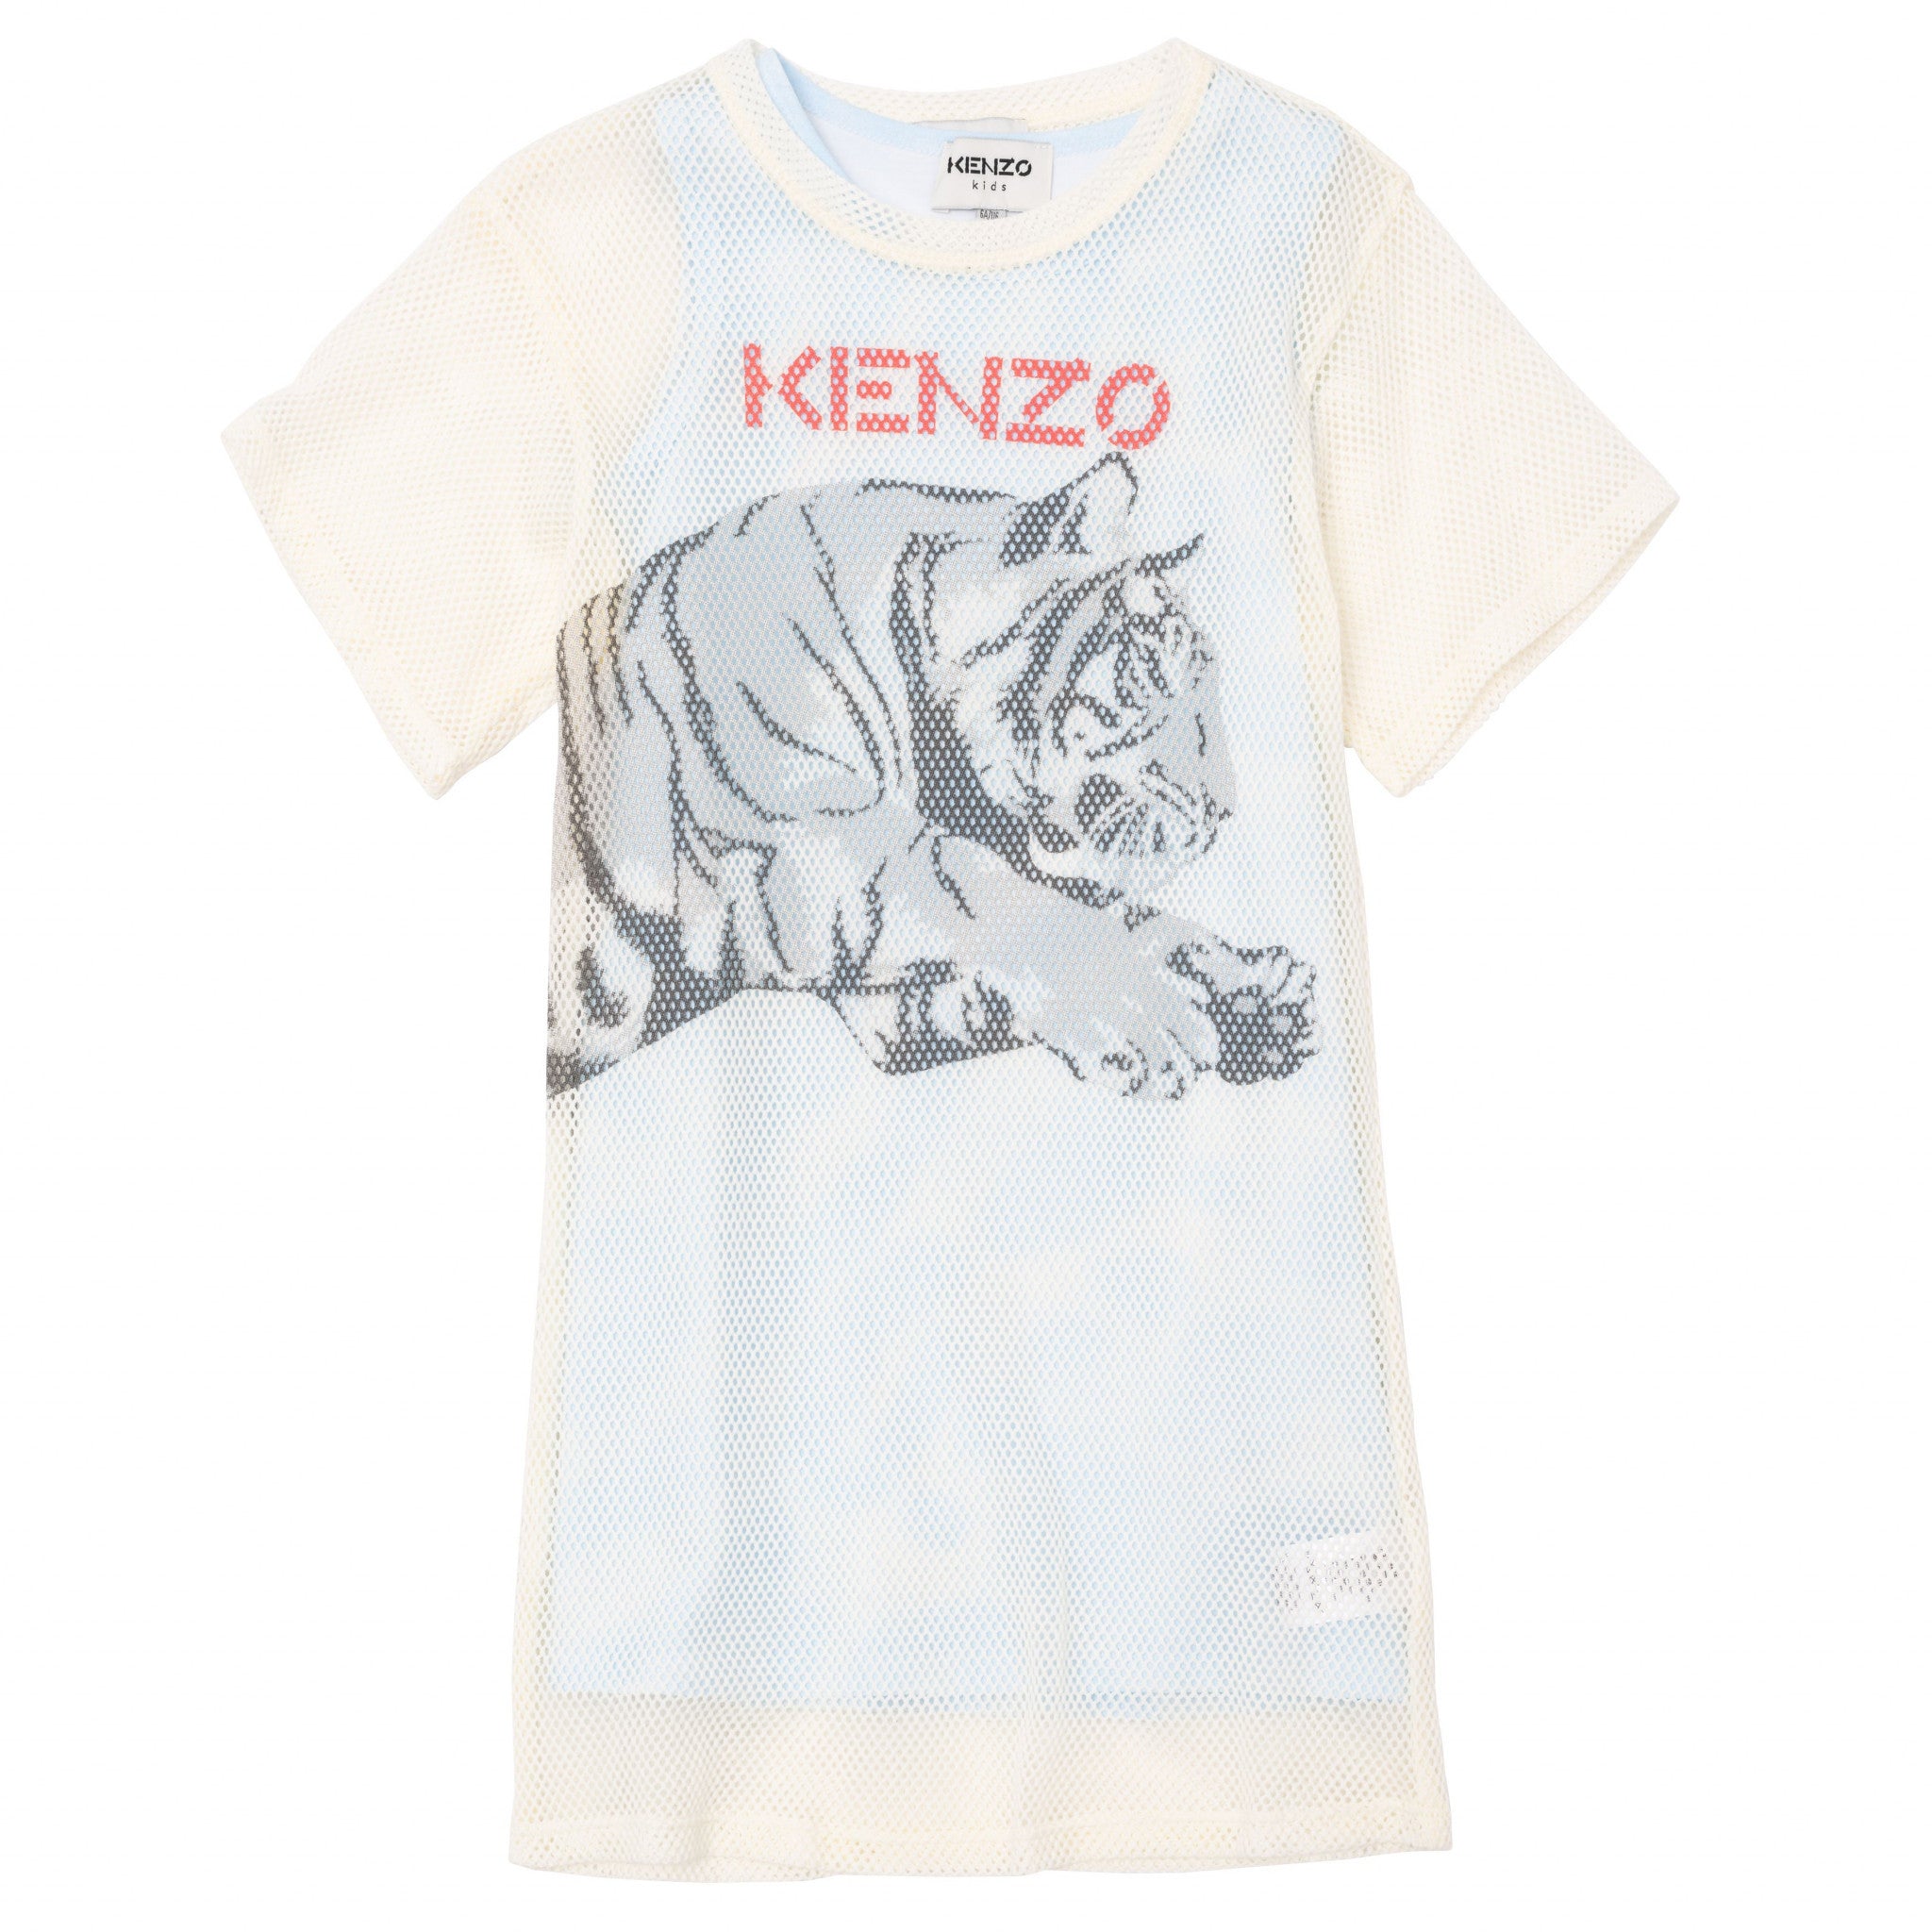 Short sleeves white cotton dress for girls with Kenzo tiger motif embroidery